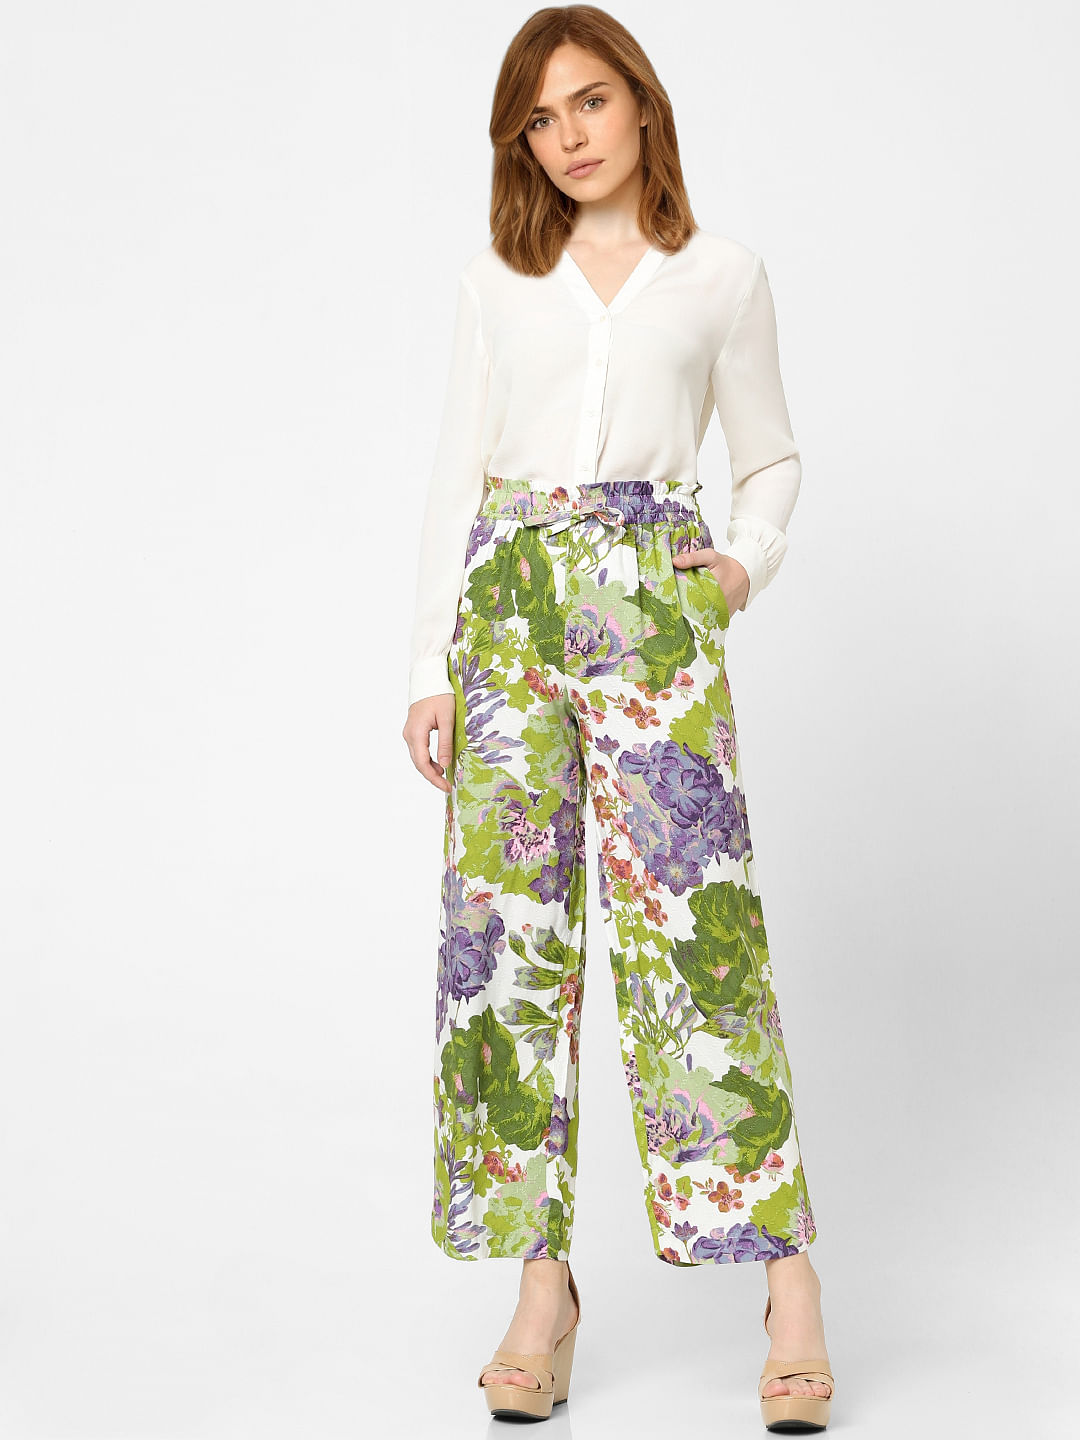 Buy Womens Floral Printed Trousers